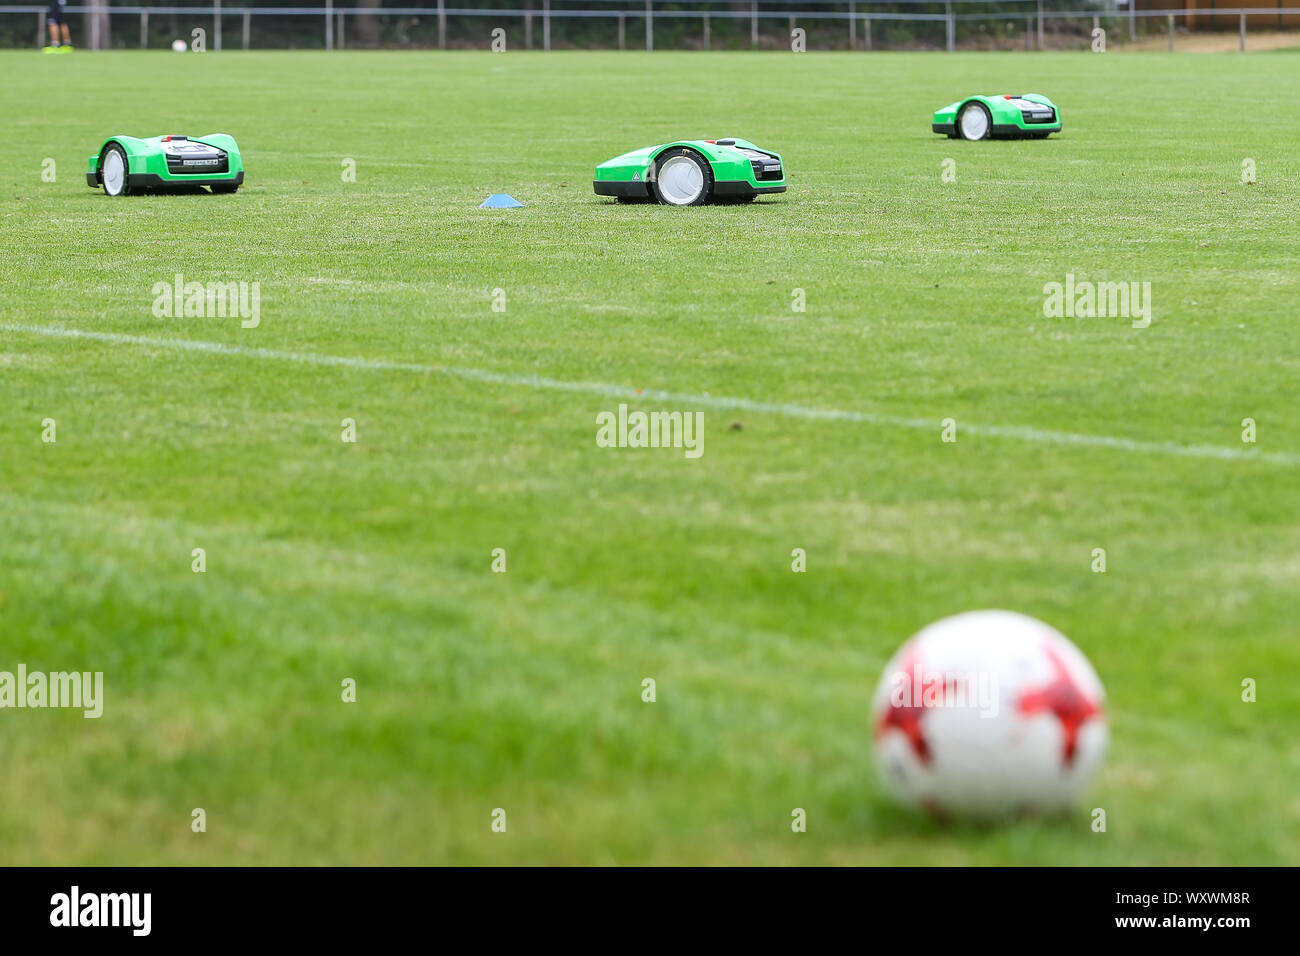 Oosterbeek, Netherlands - July 11, 2018: Automatic robotic lawnmower on green grass in the stadium. Mowing the lawn with a robot. Stock Photo